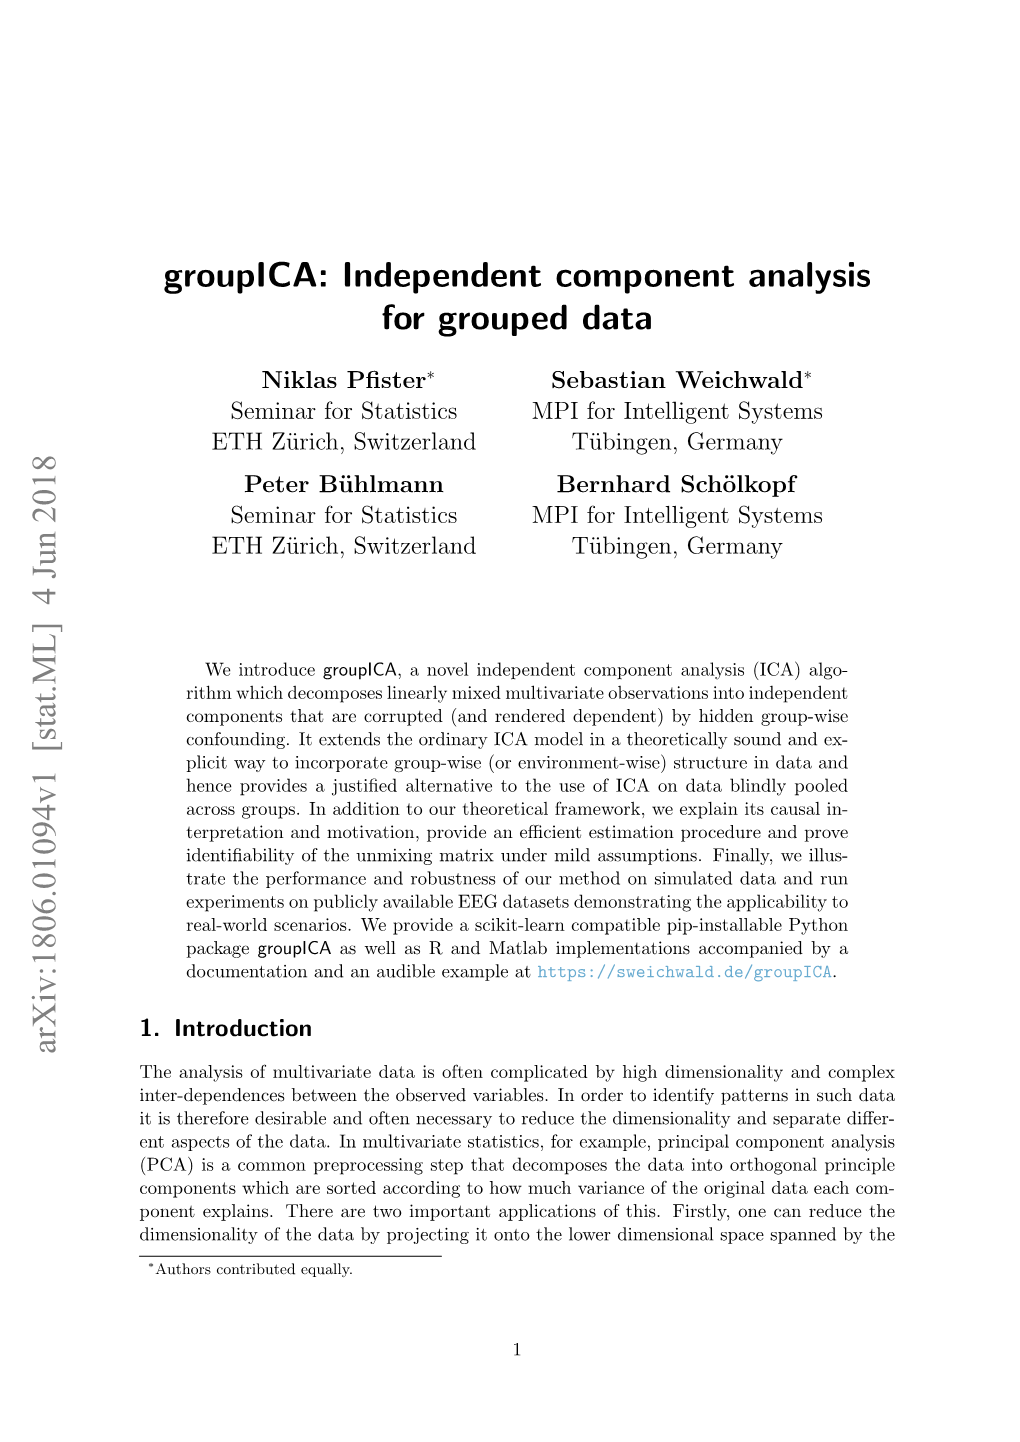 Groupica: Independent Component Analysis for Grouped Data